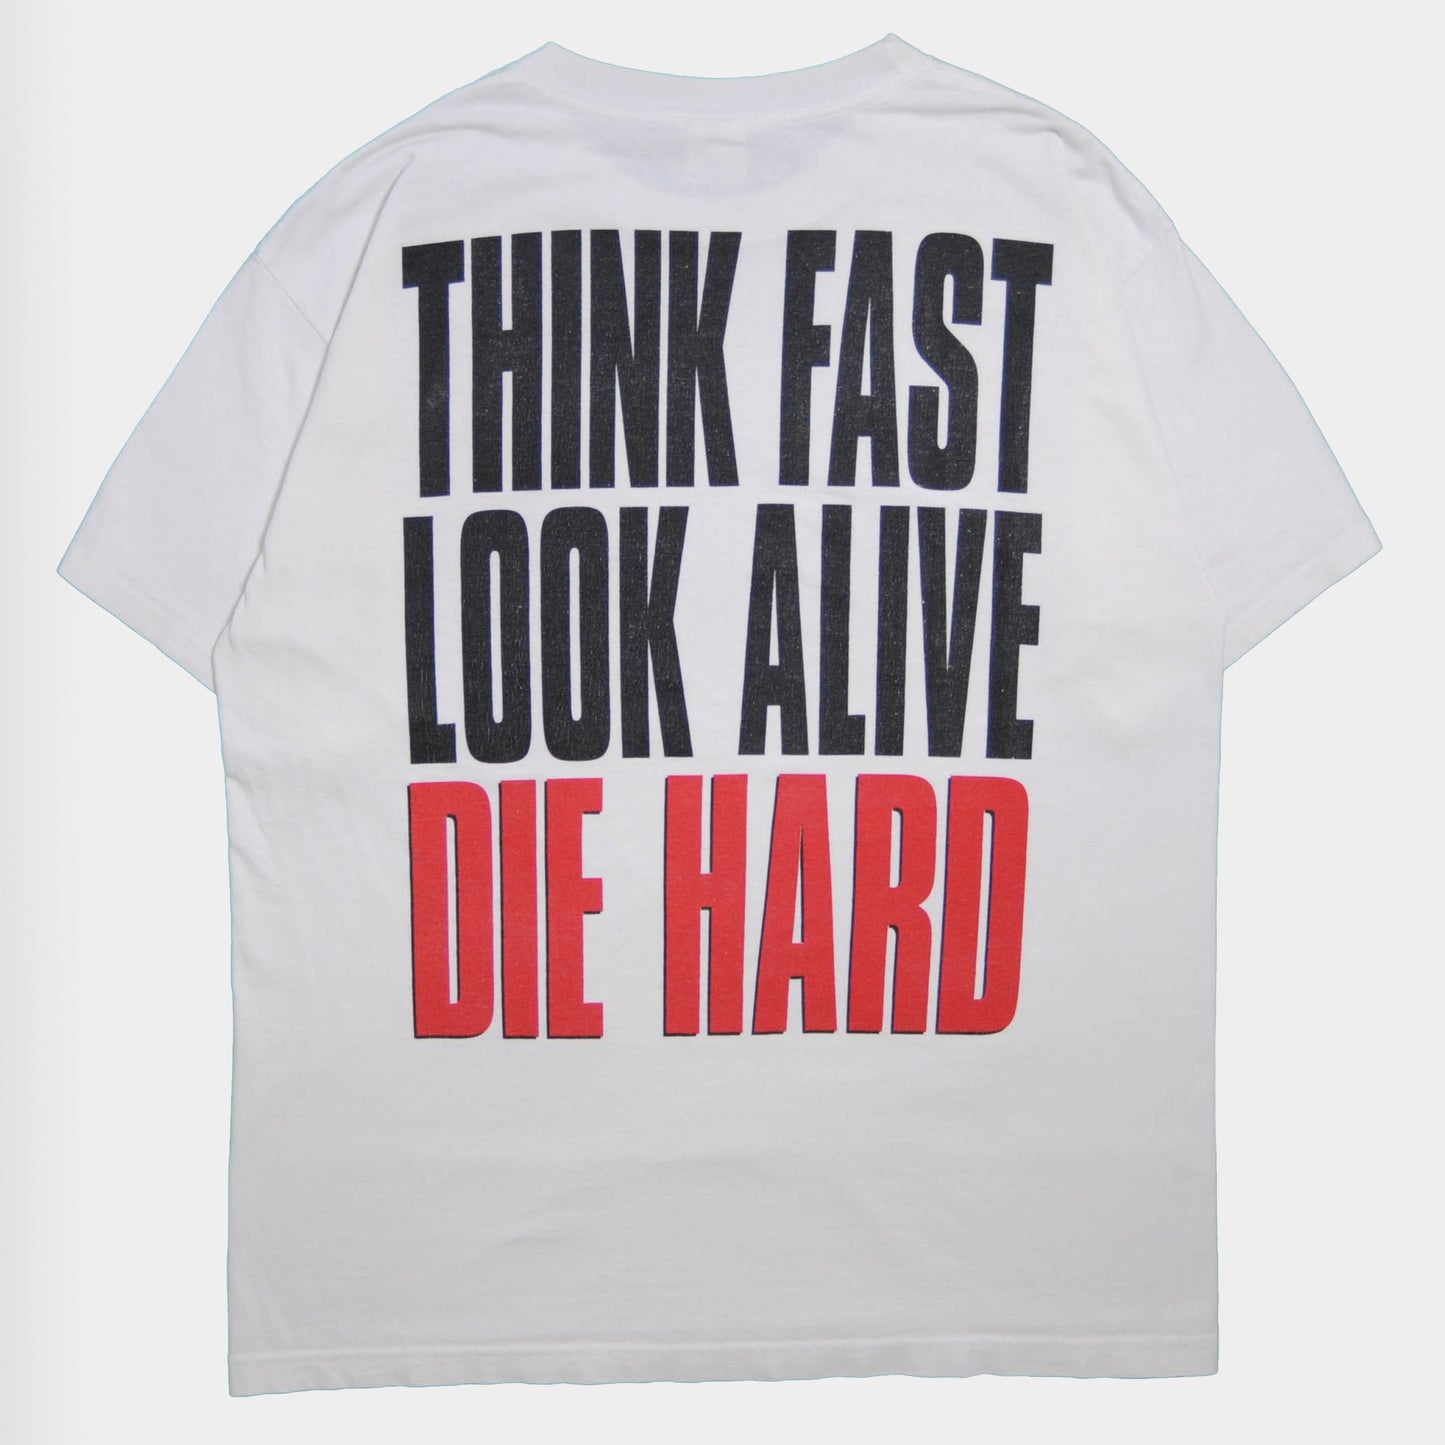 90's DIE HARD WITH A VENGEANCE Tシャツ (XL)/A1736T-O